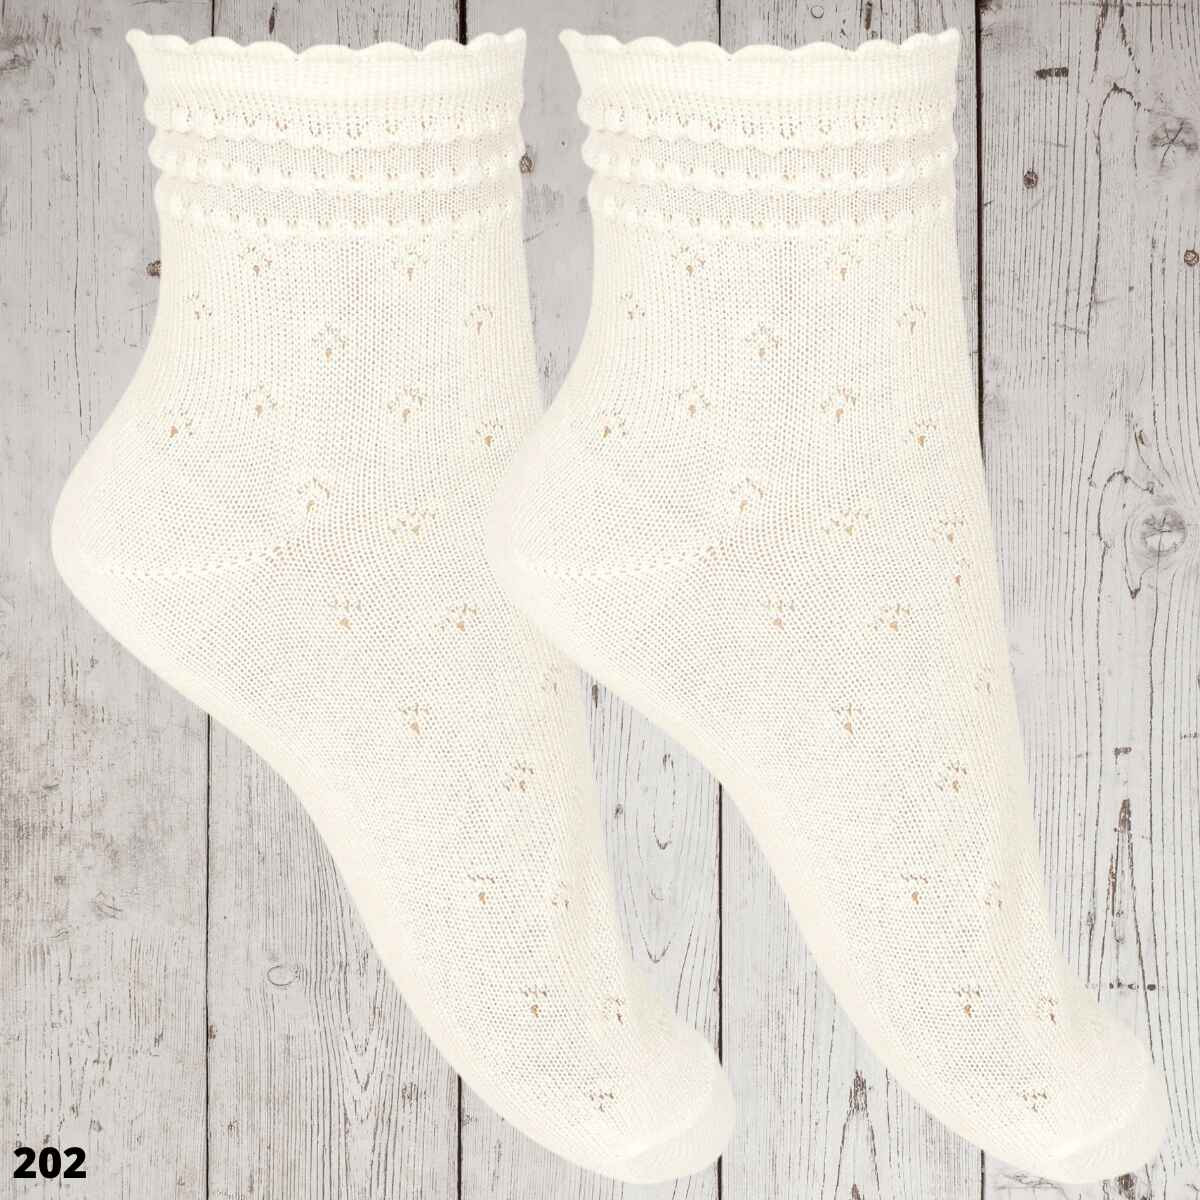 CEREMONY ANKLE SOCKS WITH RELIEF BORDER CONDOR - 3